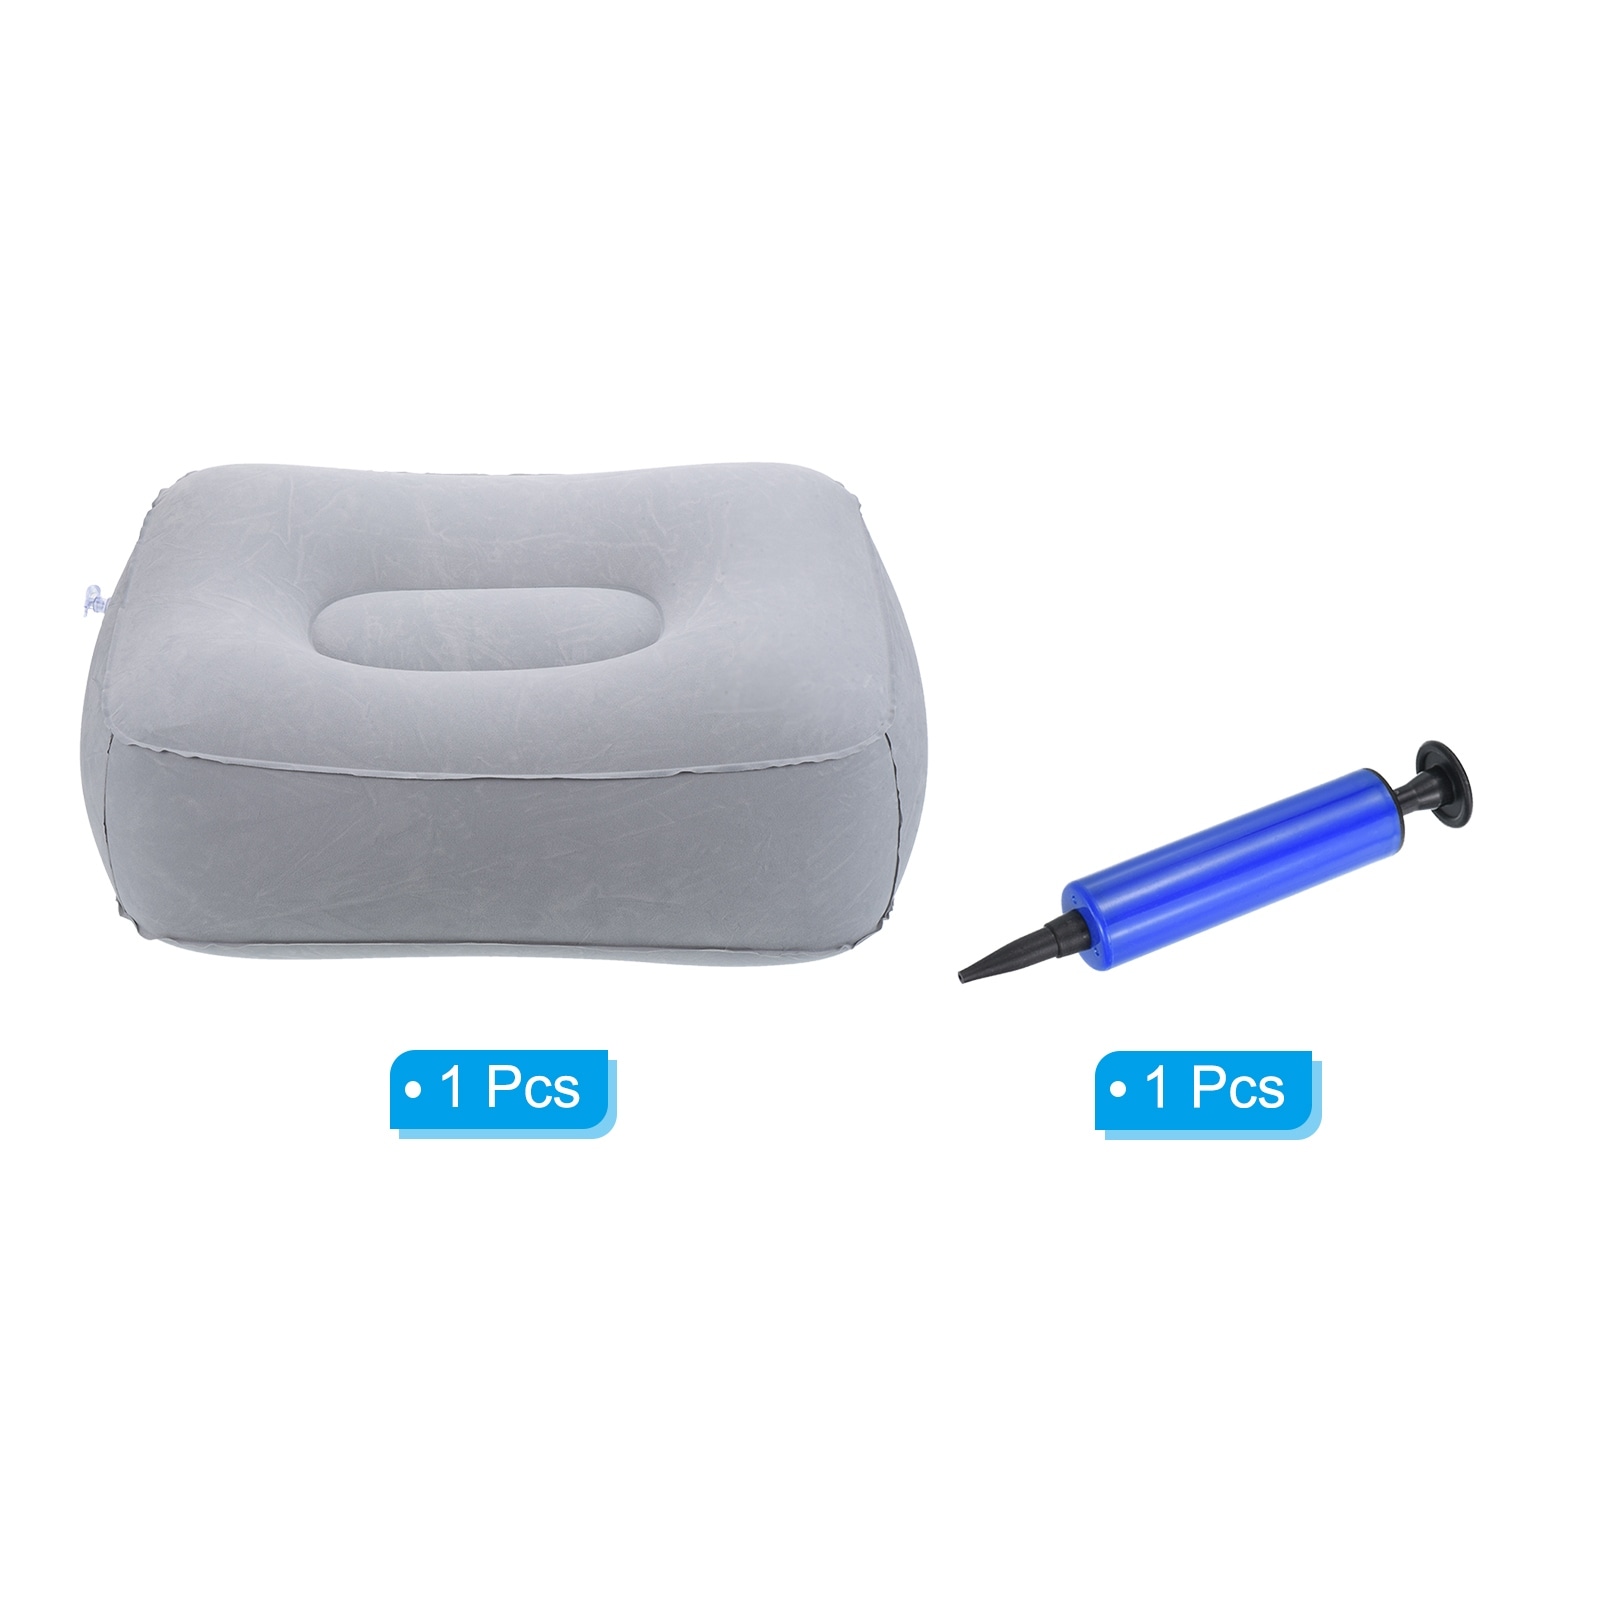 https://ak1.ostkcdn.com/images/products/is/images/direct/b4aca382f89f2a96aa7875991a54e47540597644/Travel-Foot-Rest-Pillow%2C-Inflatable-Foot-Rest-Mat-with-Air-Pump%2C-Gray.jpg